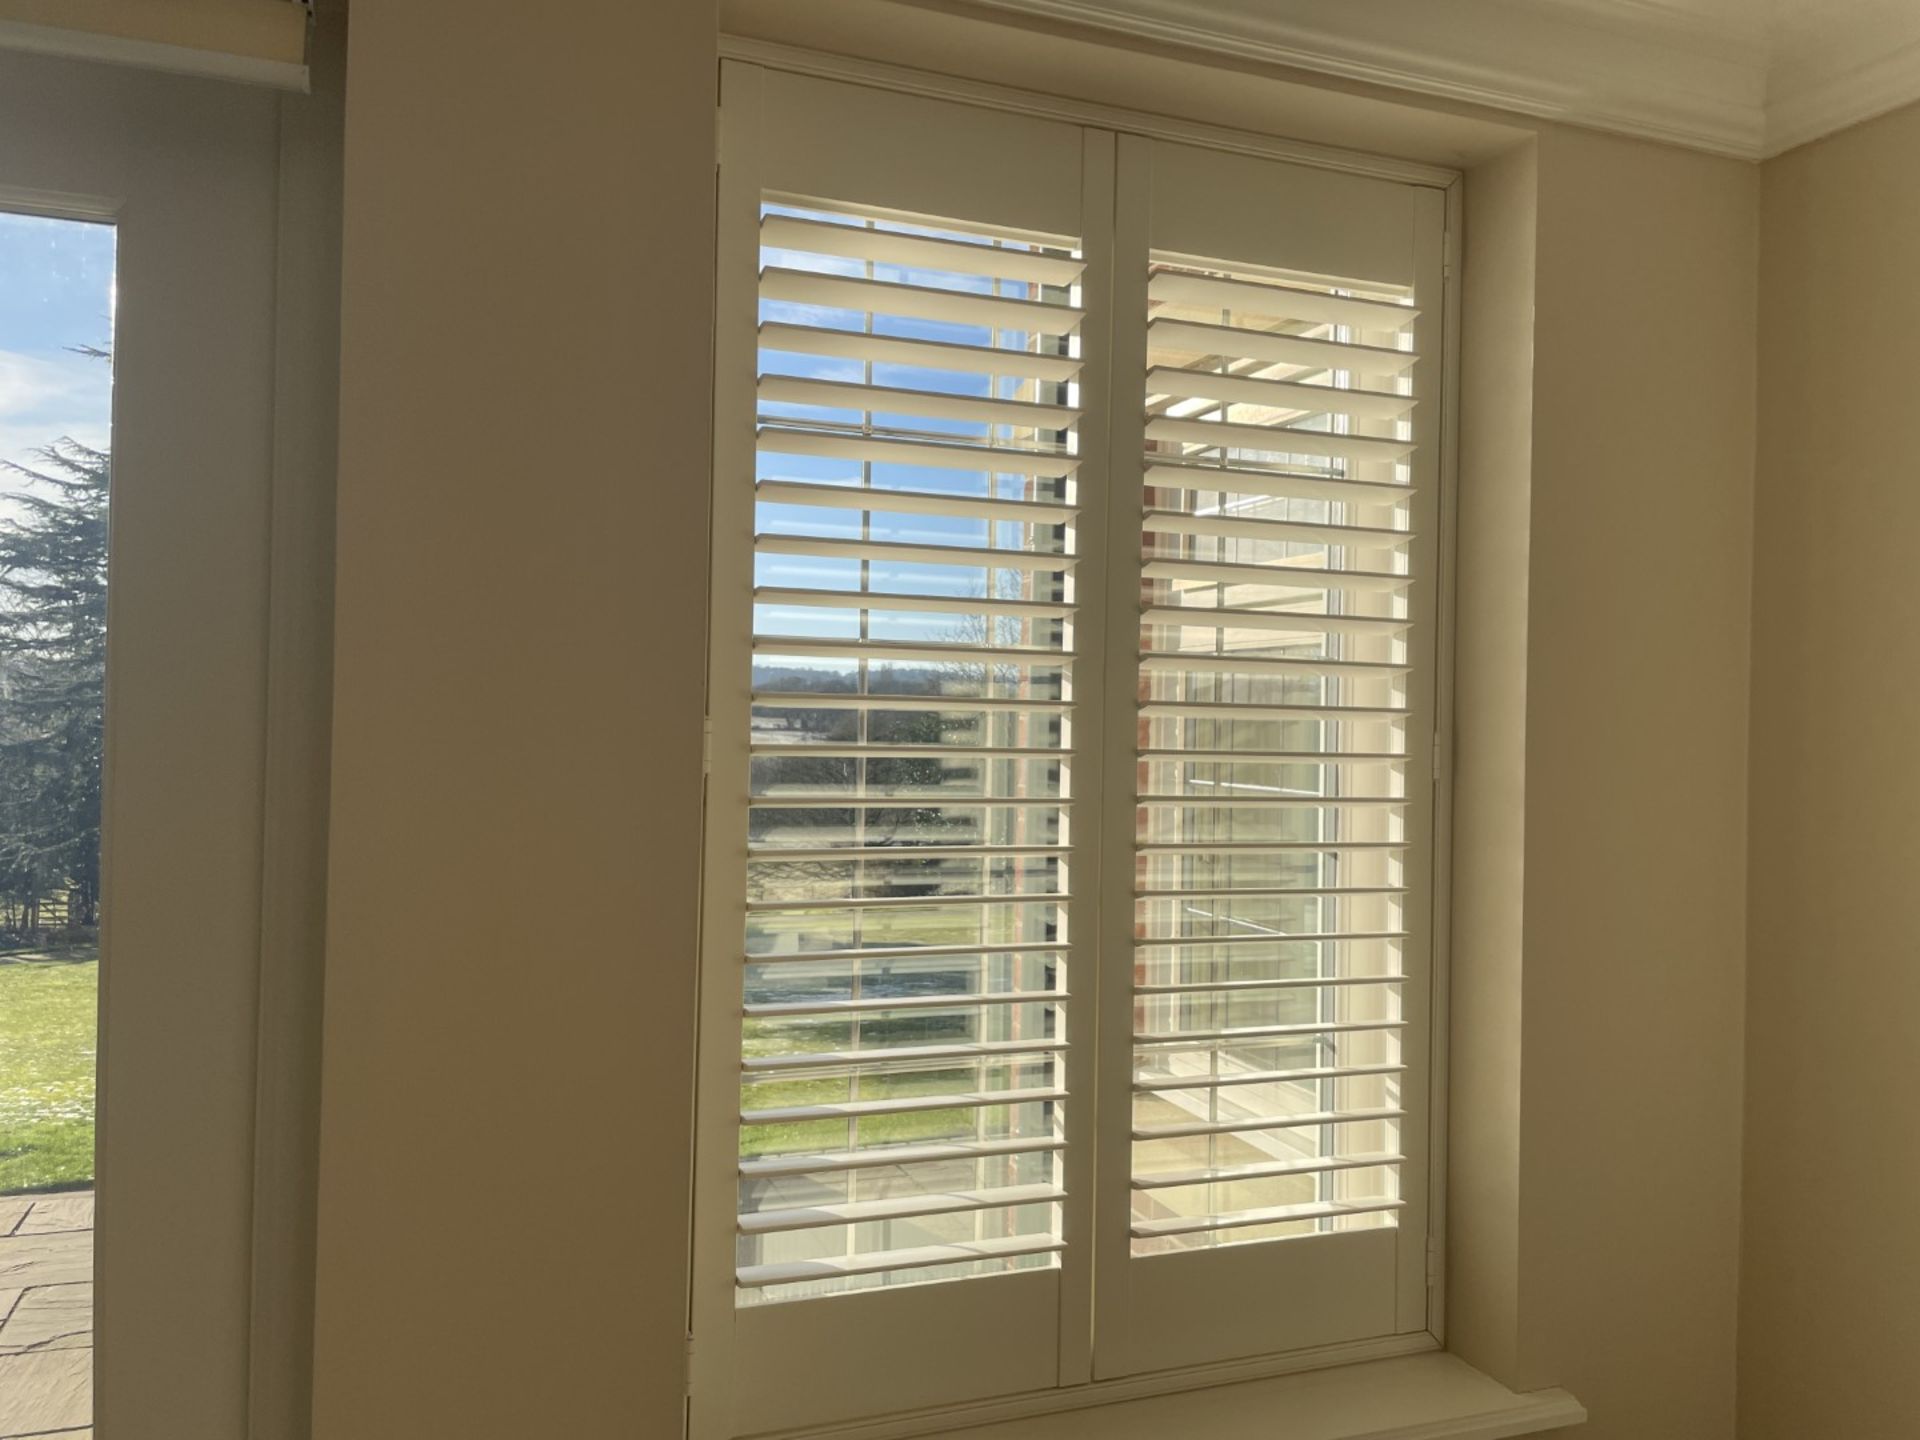 1 x Hardwood Timber Double Glazed Window Frames fitted with Shutter Blinds, In White - Ref: PAN108 - Image 7 of 19